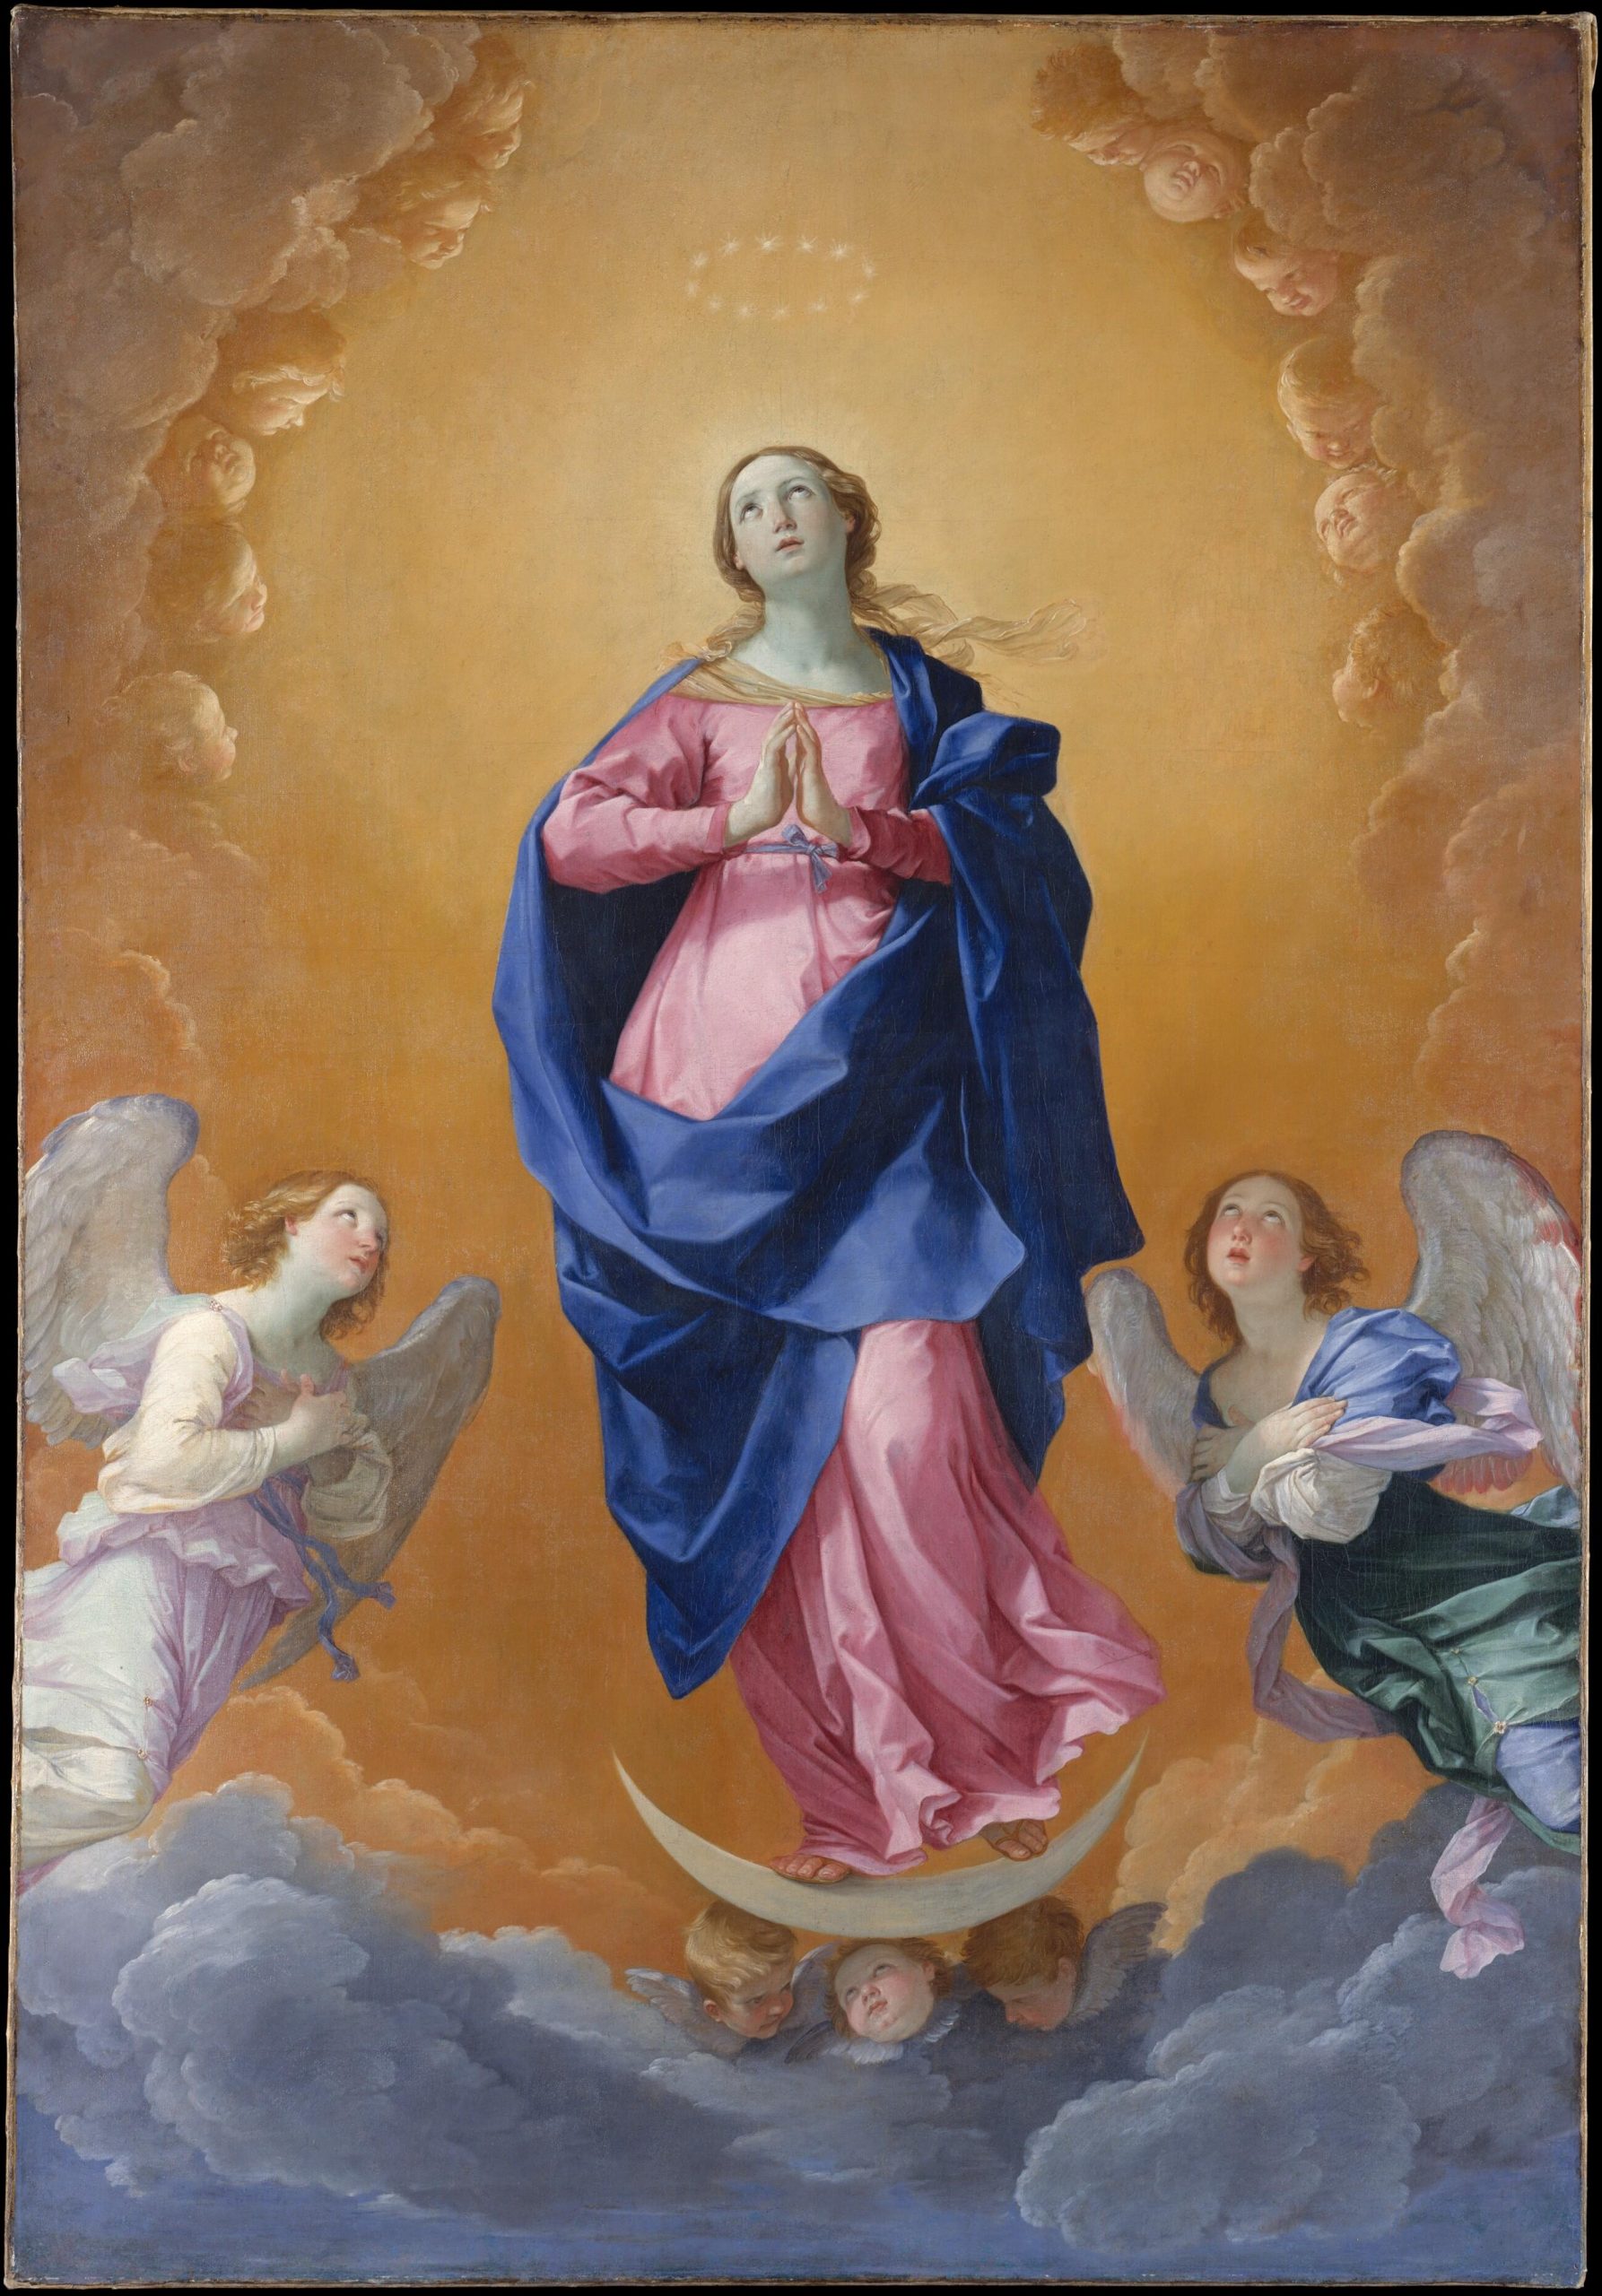 Mary’s Assumption: An Important Dogma